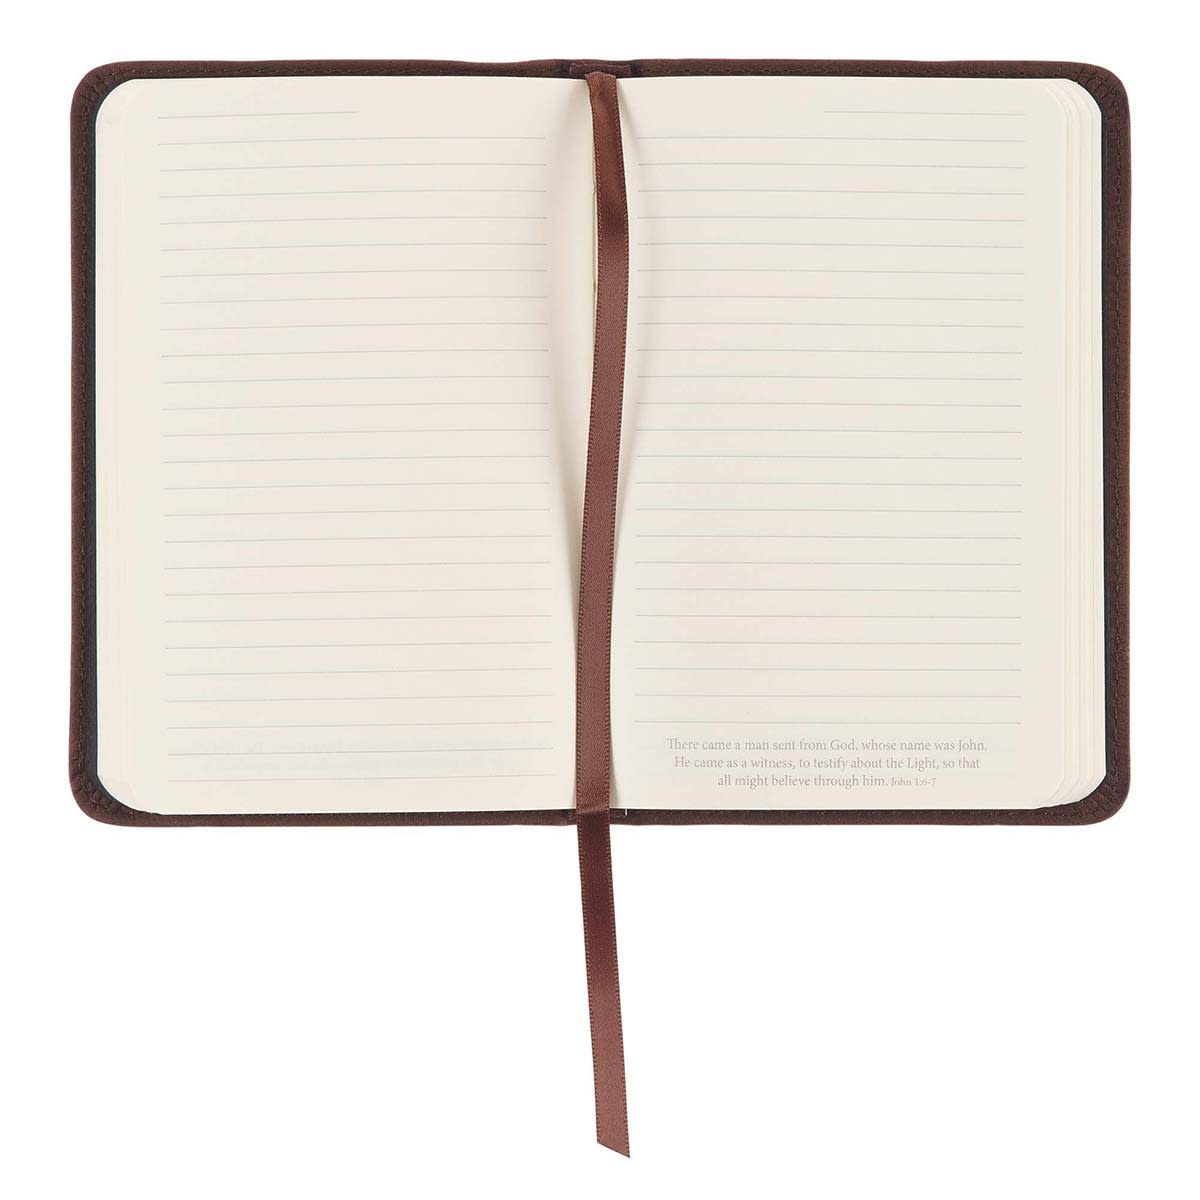 All Things Are Possible Pocket-sized Full Grain Leather Journal - Matthew 19:26